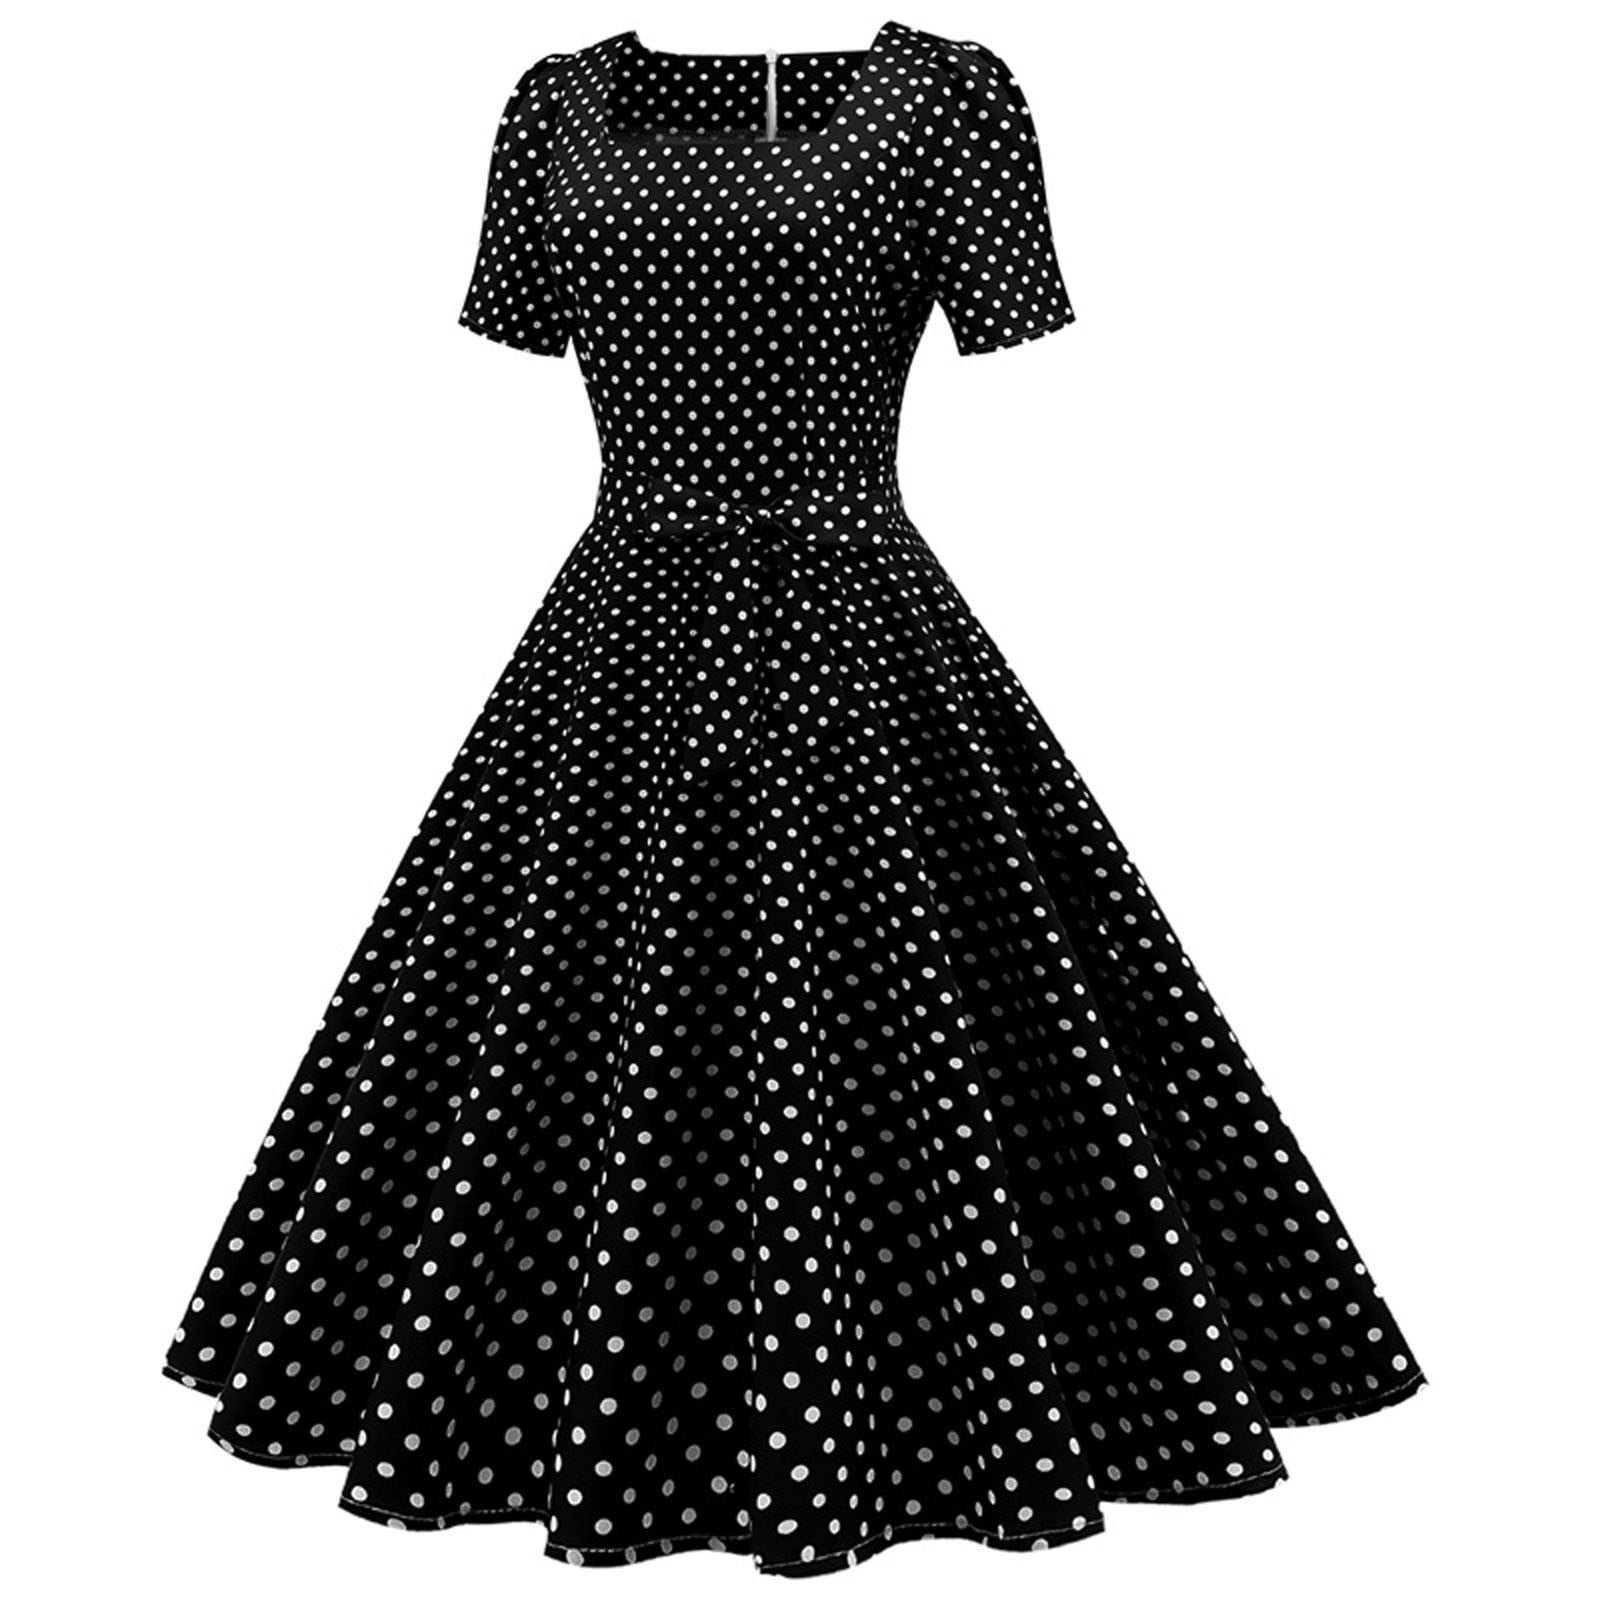 Fuazewewe Women Short Sleeve 1950s Housewife Evening Party Prom Dress ...